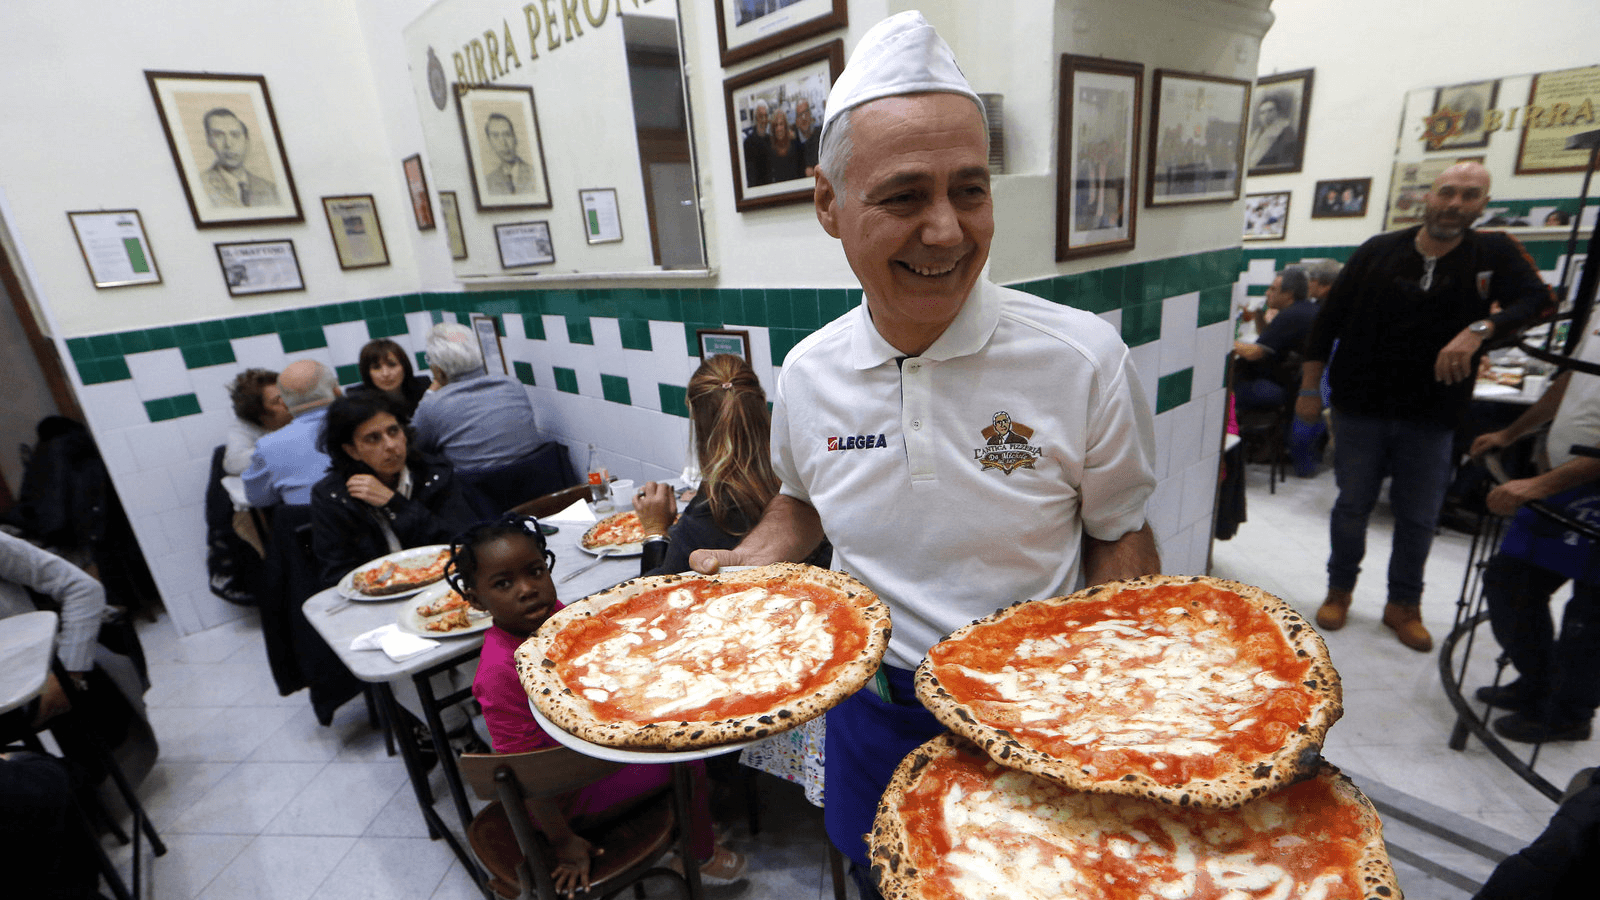 Neopolitan pizza making is now part of the Intangible Cultural Heritage of Humanity